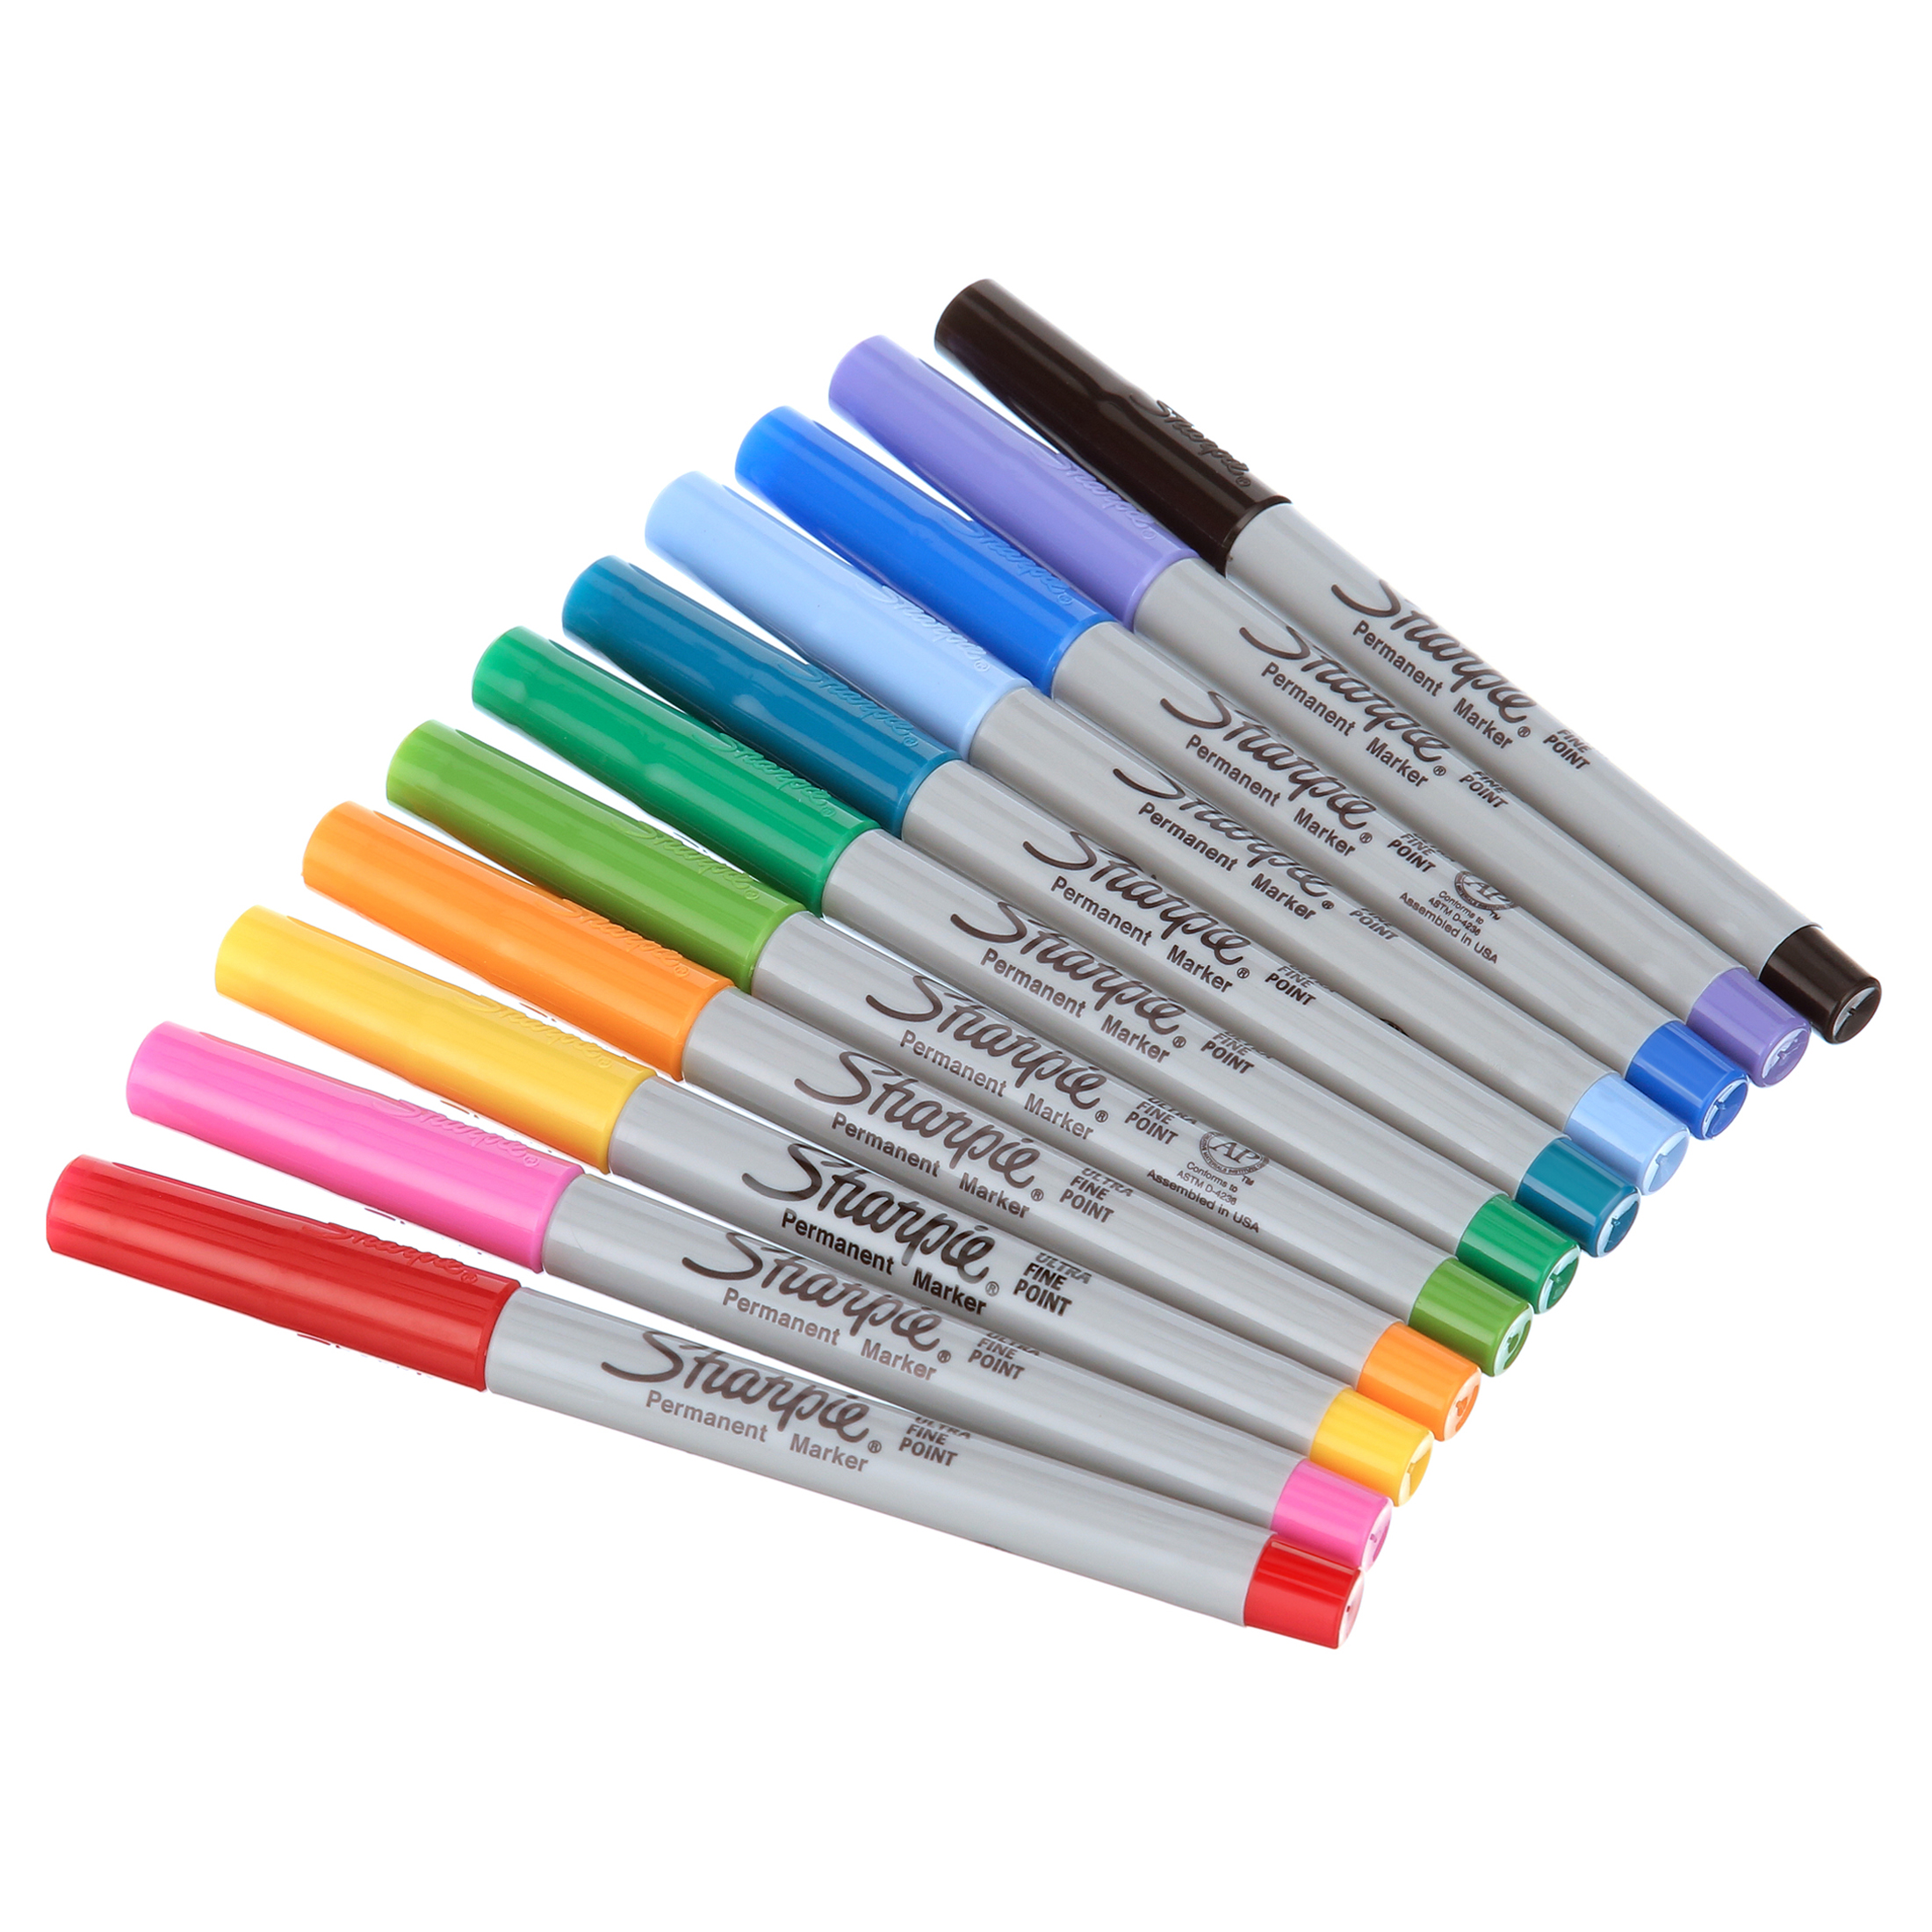 Sharpie Permanent Marker Assorted Pack, Plus 1 Mystery Color, Special Edition, 30 Count - image 6 of 7